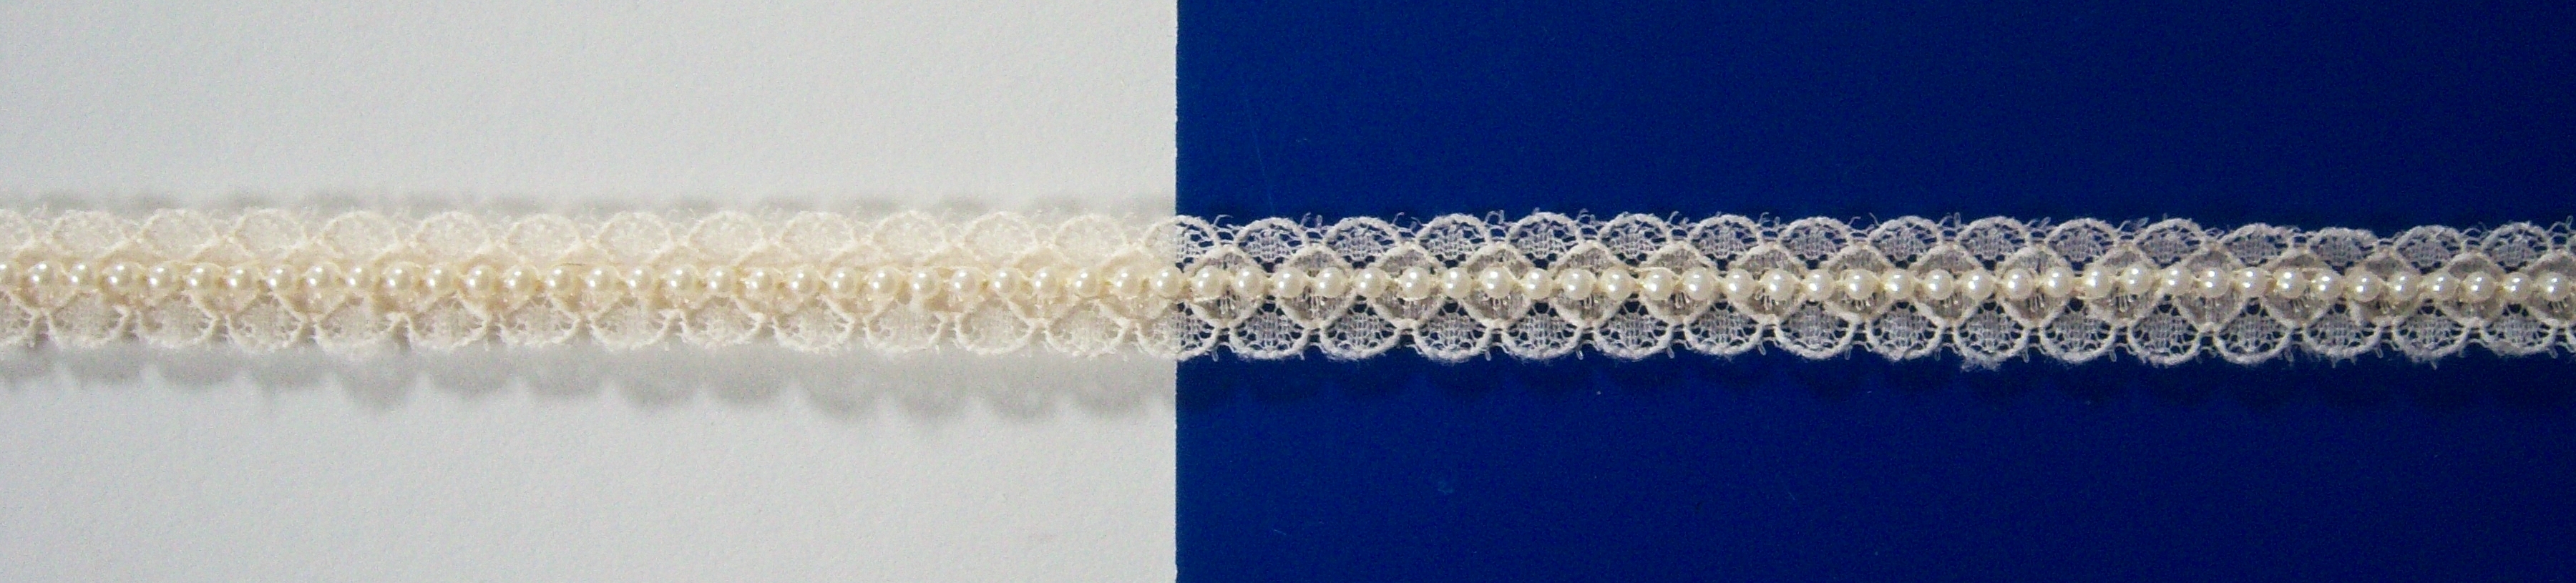 Ivory Lace/Ivory Pearls 1/2" Braid